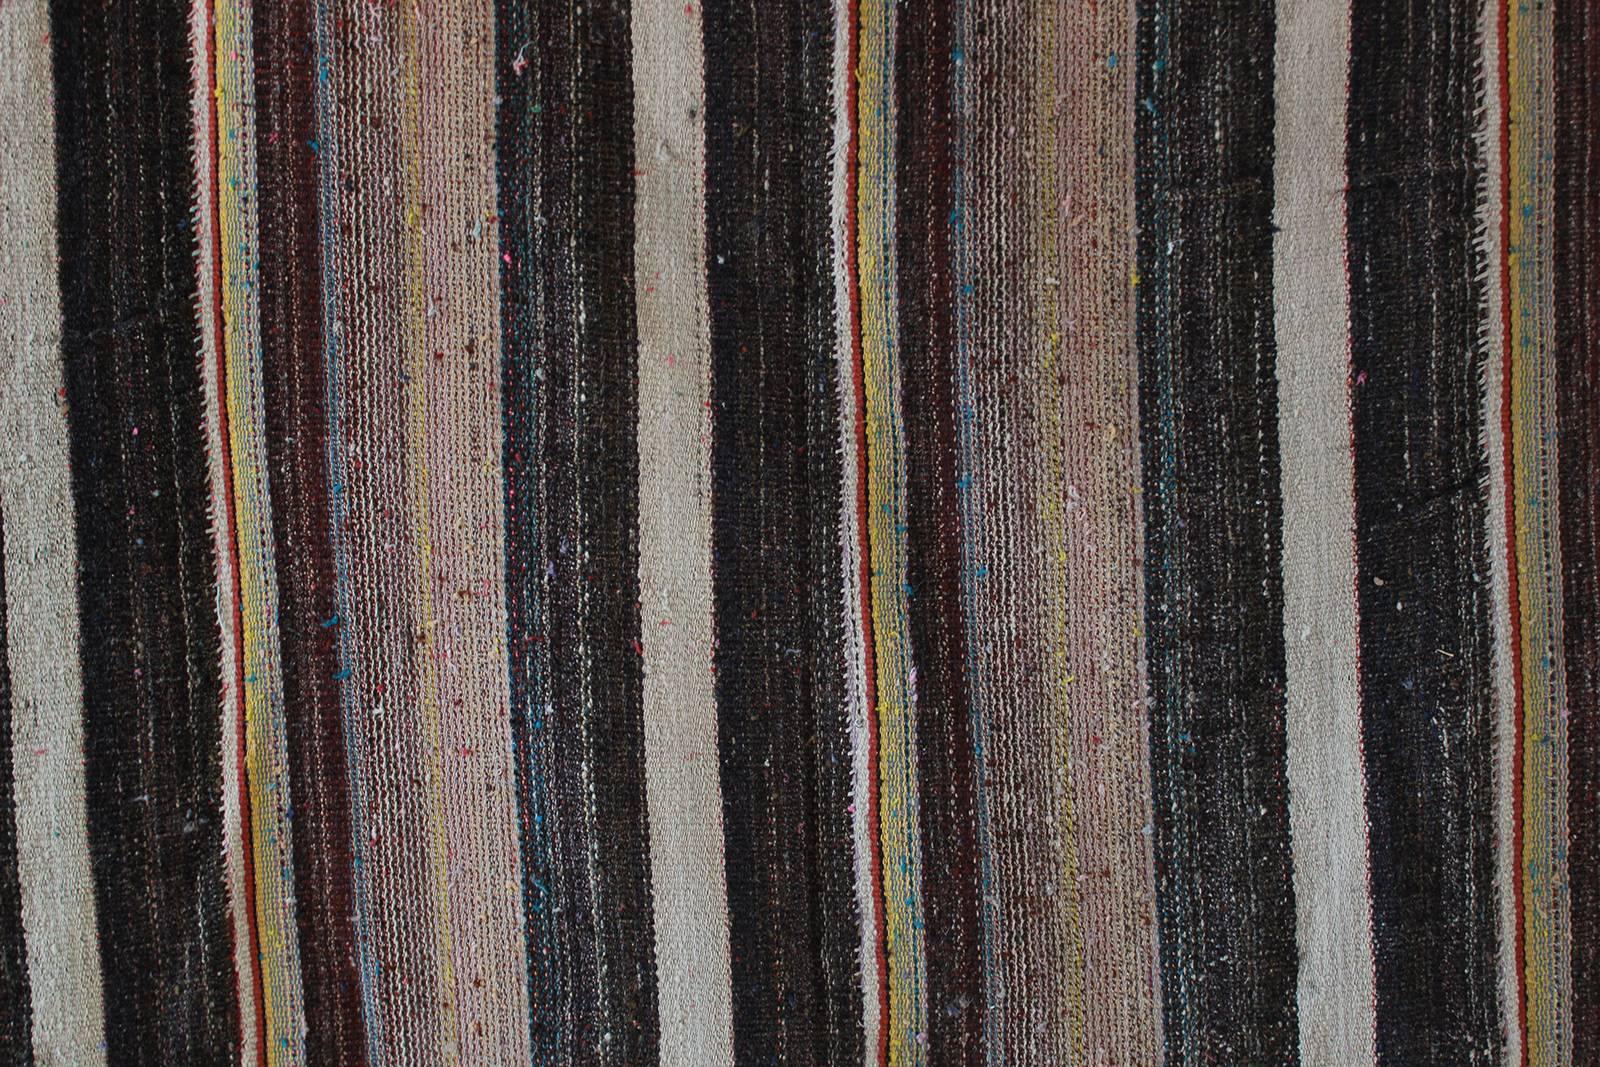 Rustic flat-woven wool striped rug with brown and pink hues.